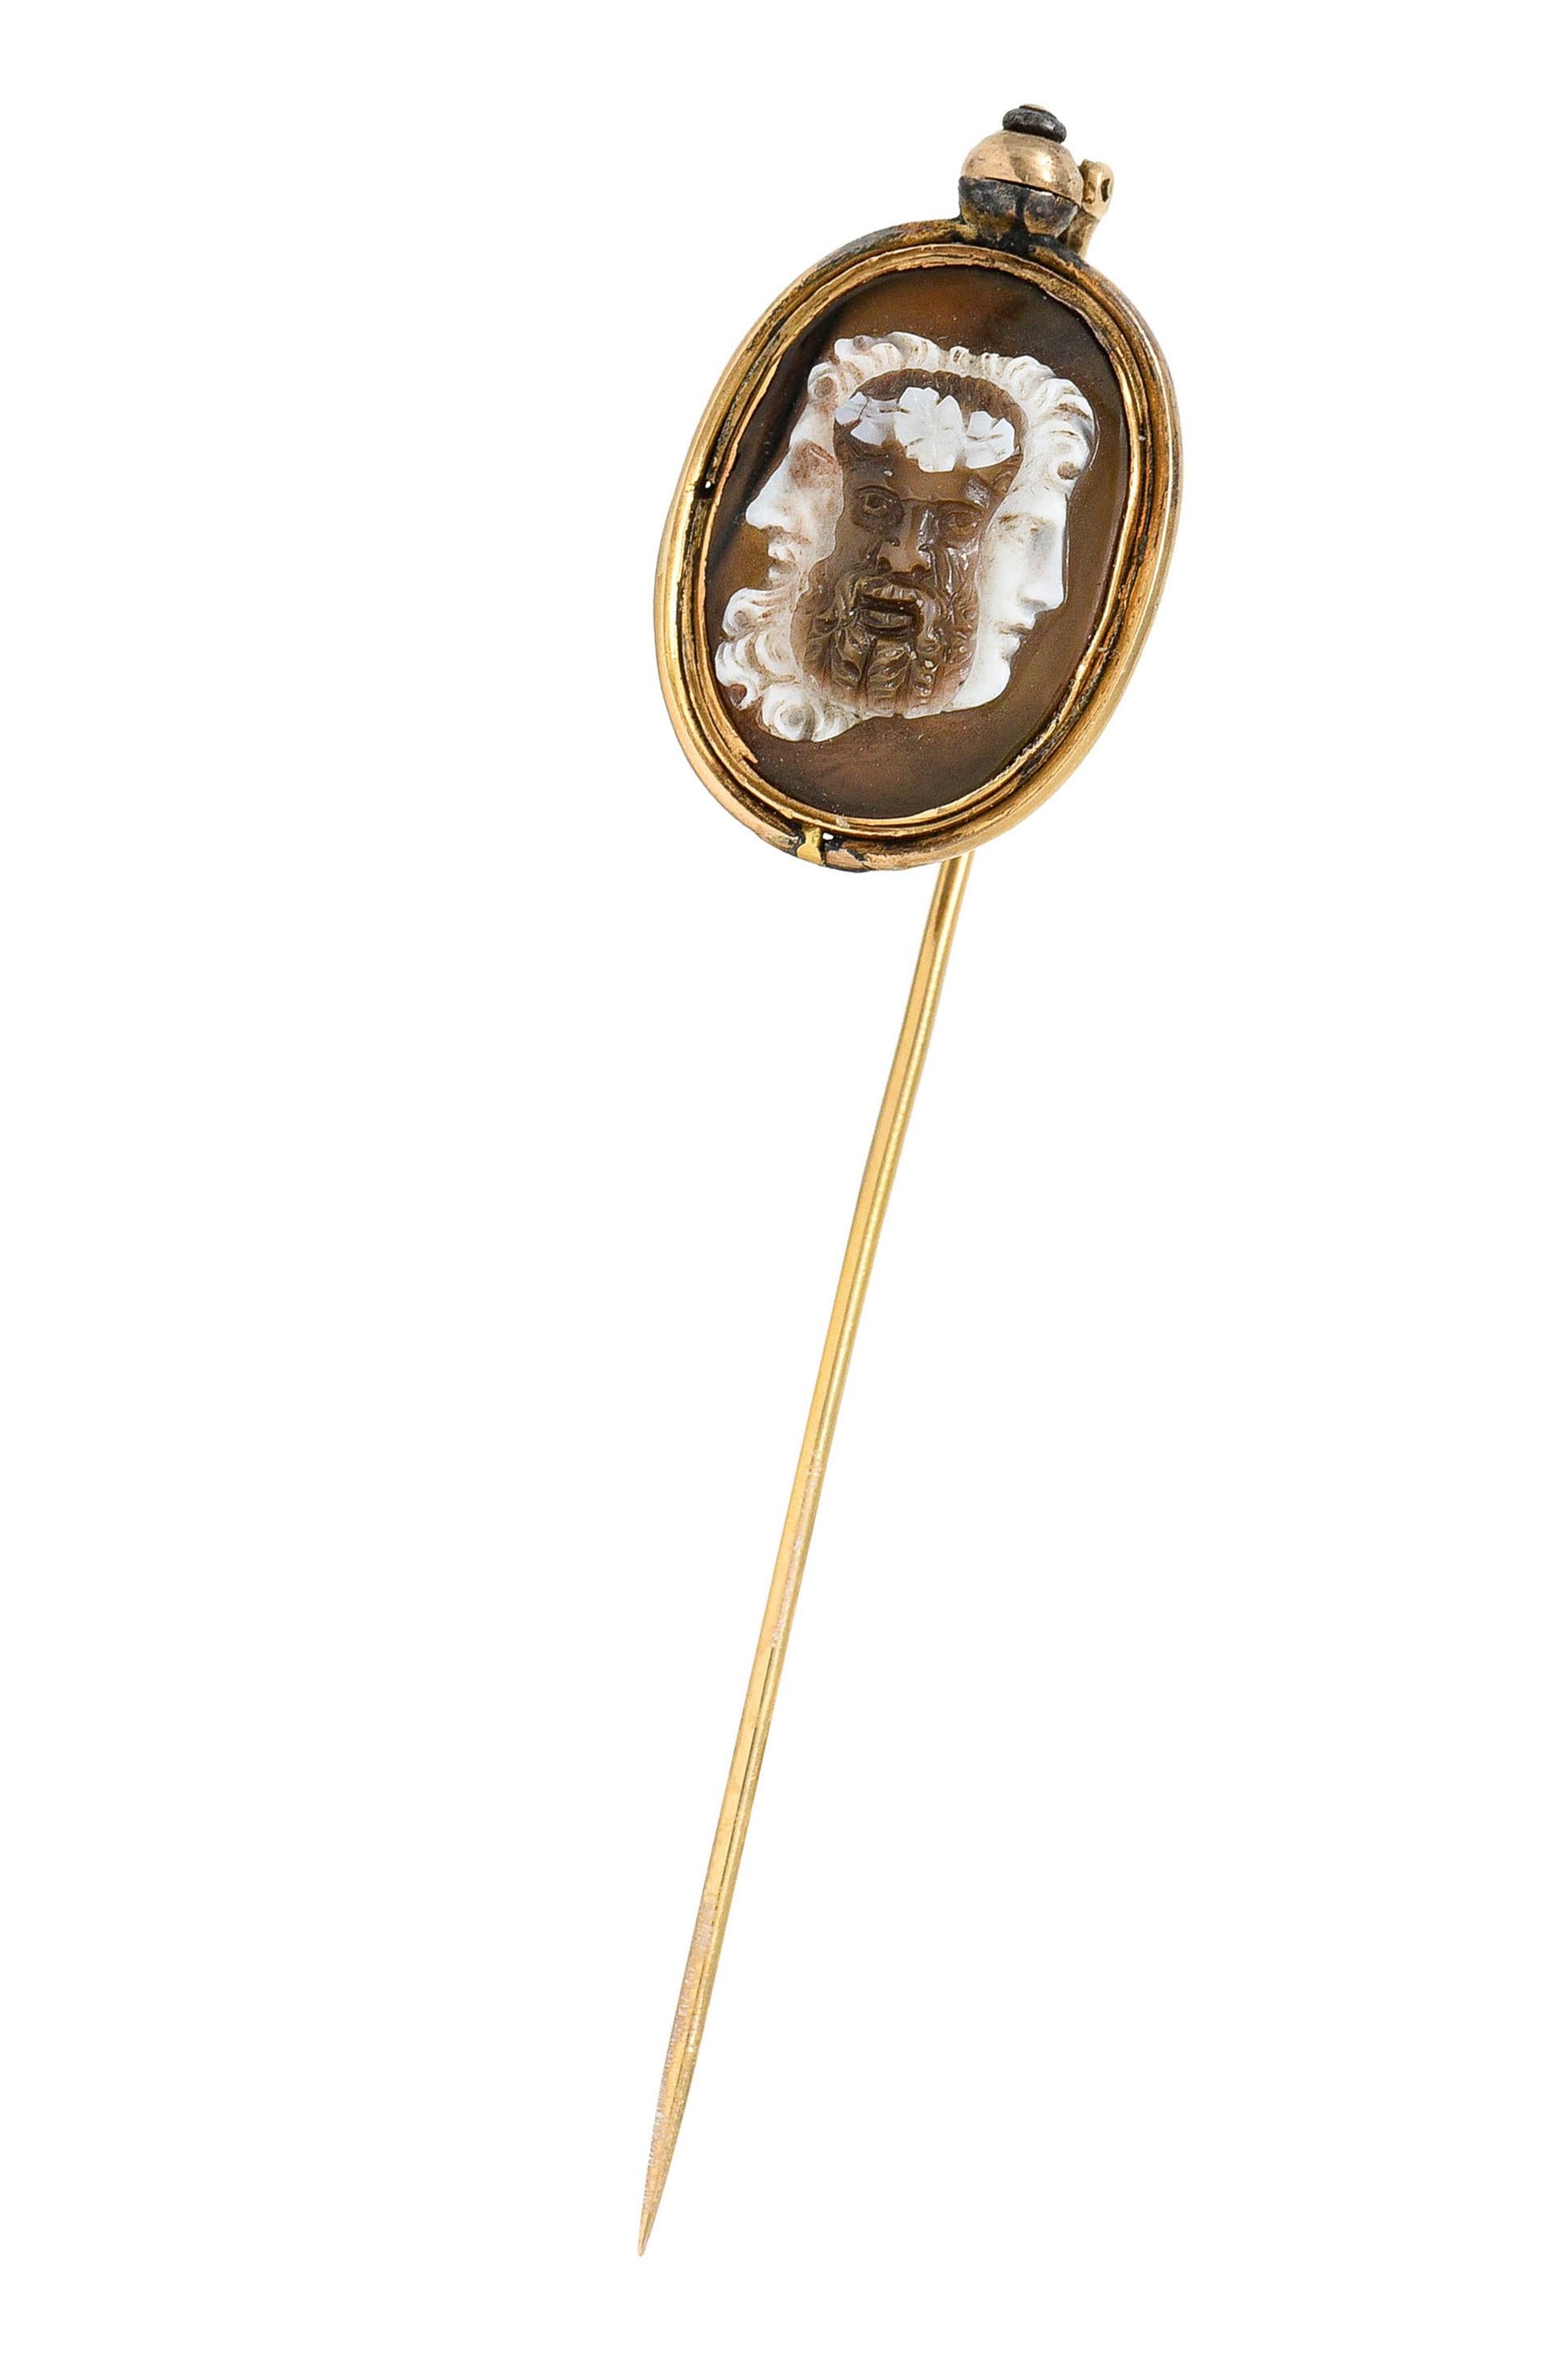 Stickpin features an oval agate tablet measuring approximately 16.8 x 11.8 mm

Translucent with striking white contrasting brown color

Bezel set in a gold surround that can uniquely pivot and rotate to display either side of stone

Both sides are